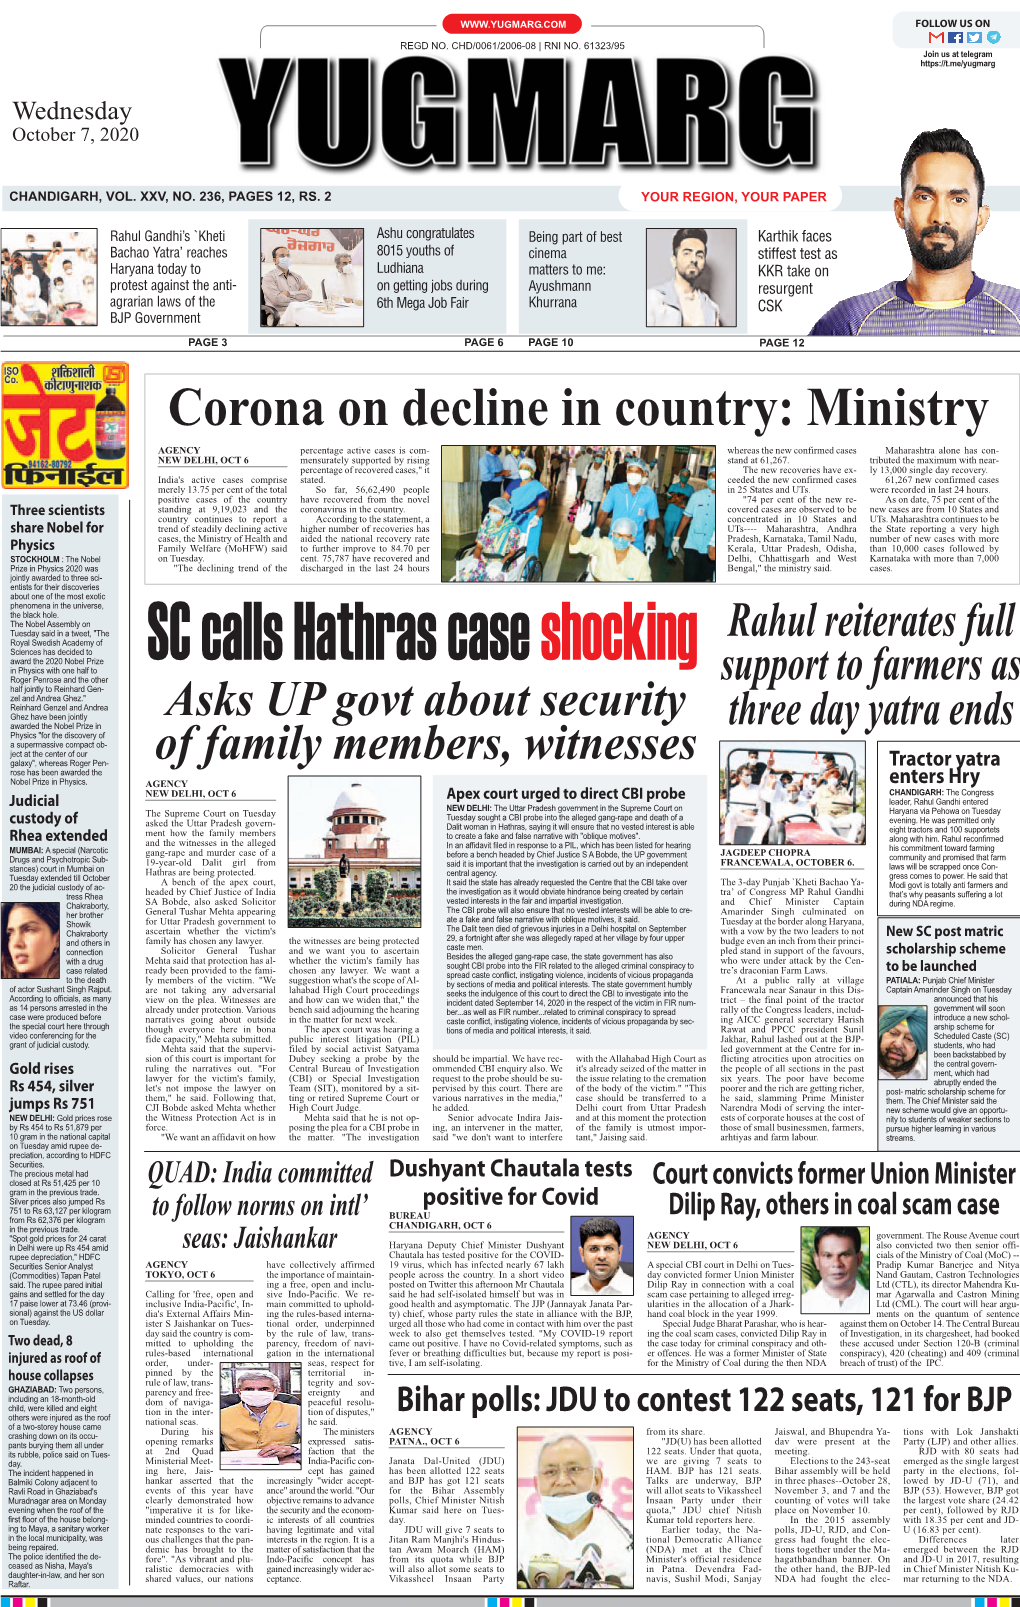 Corona on Decline in Country: Ministry